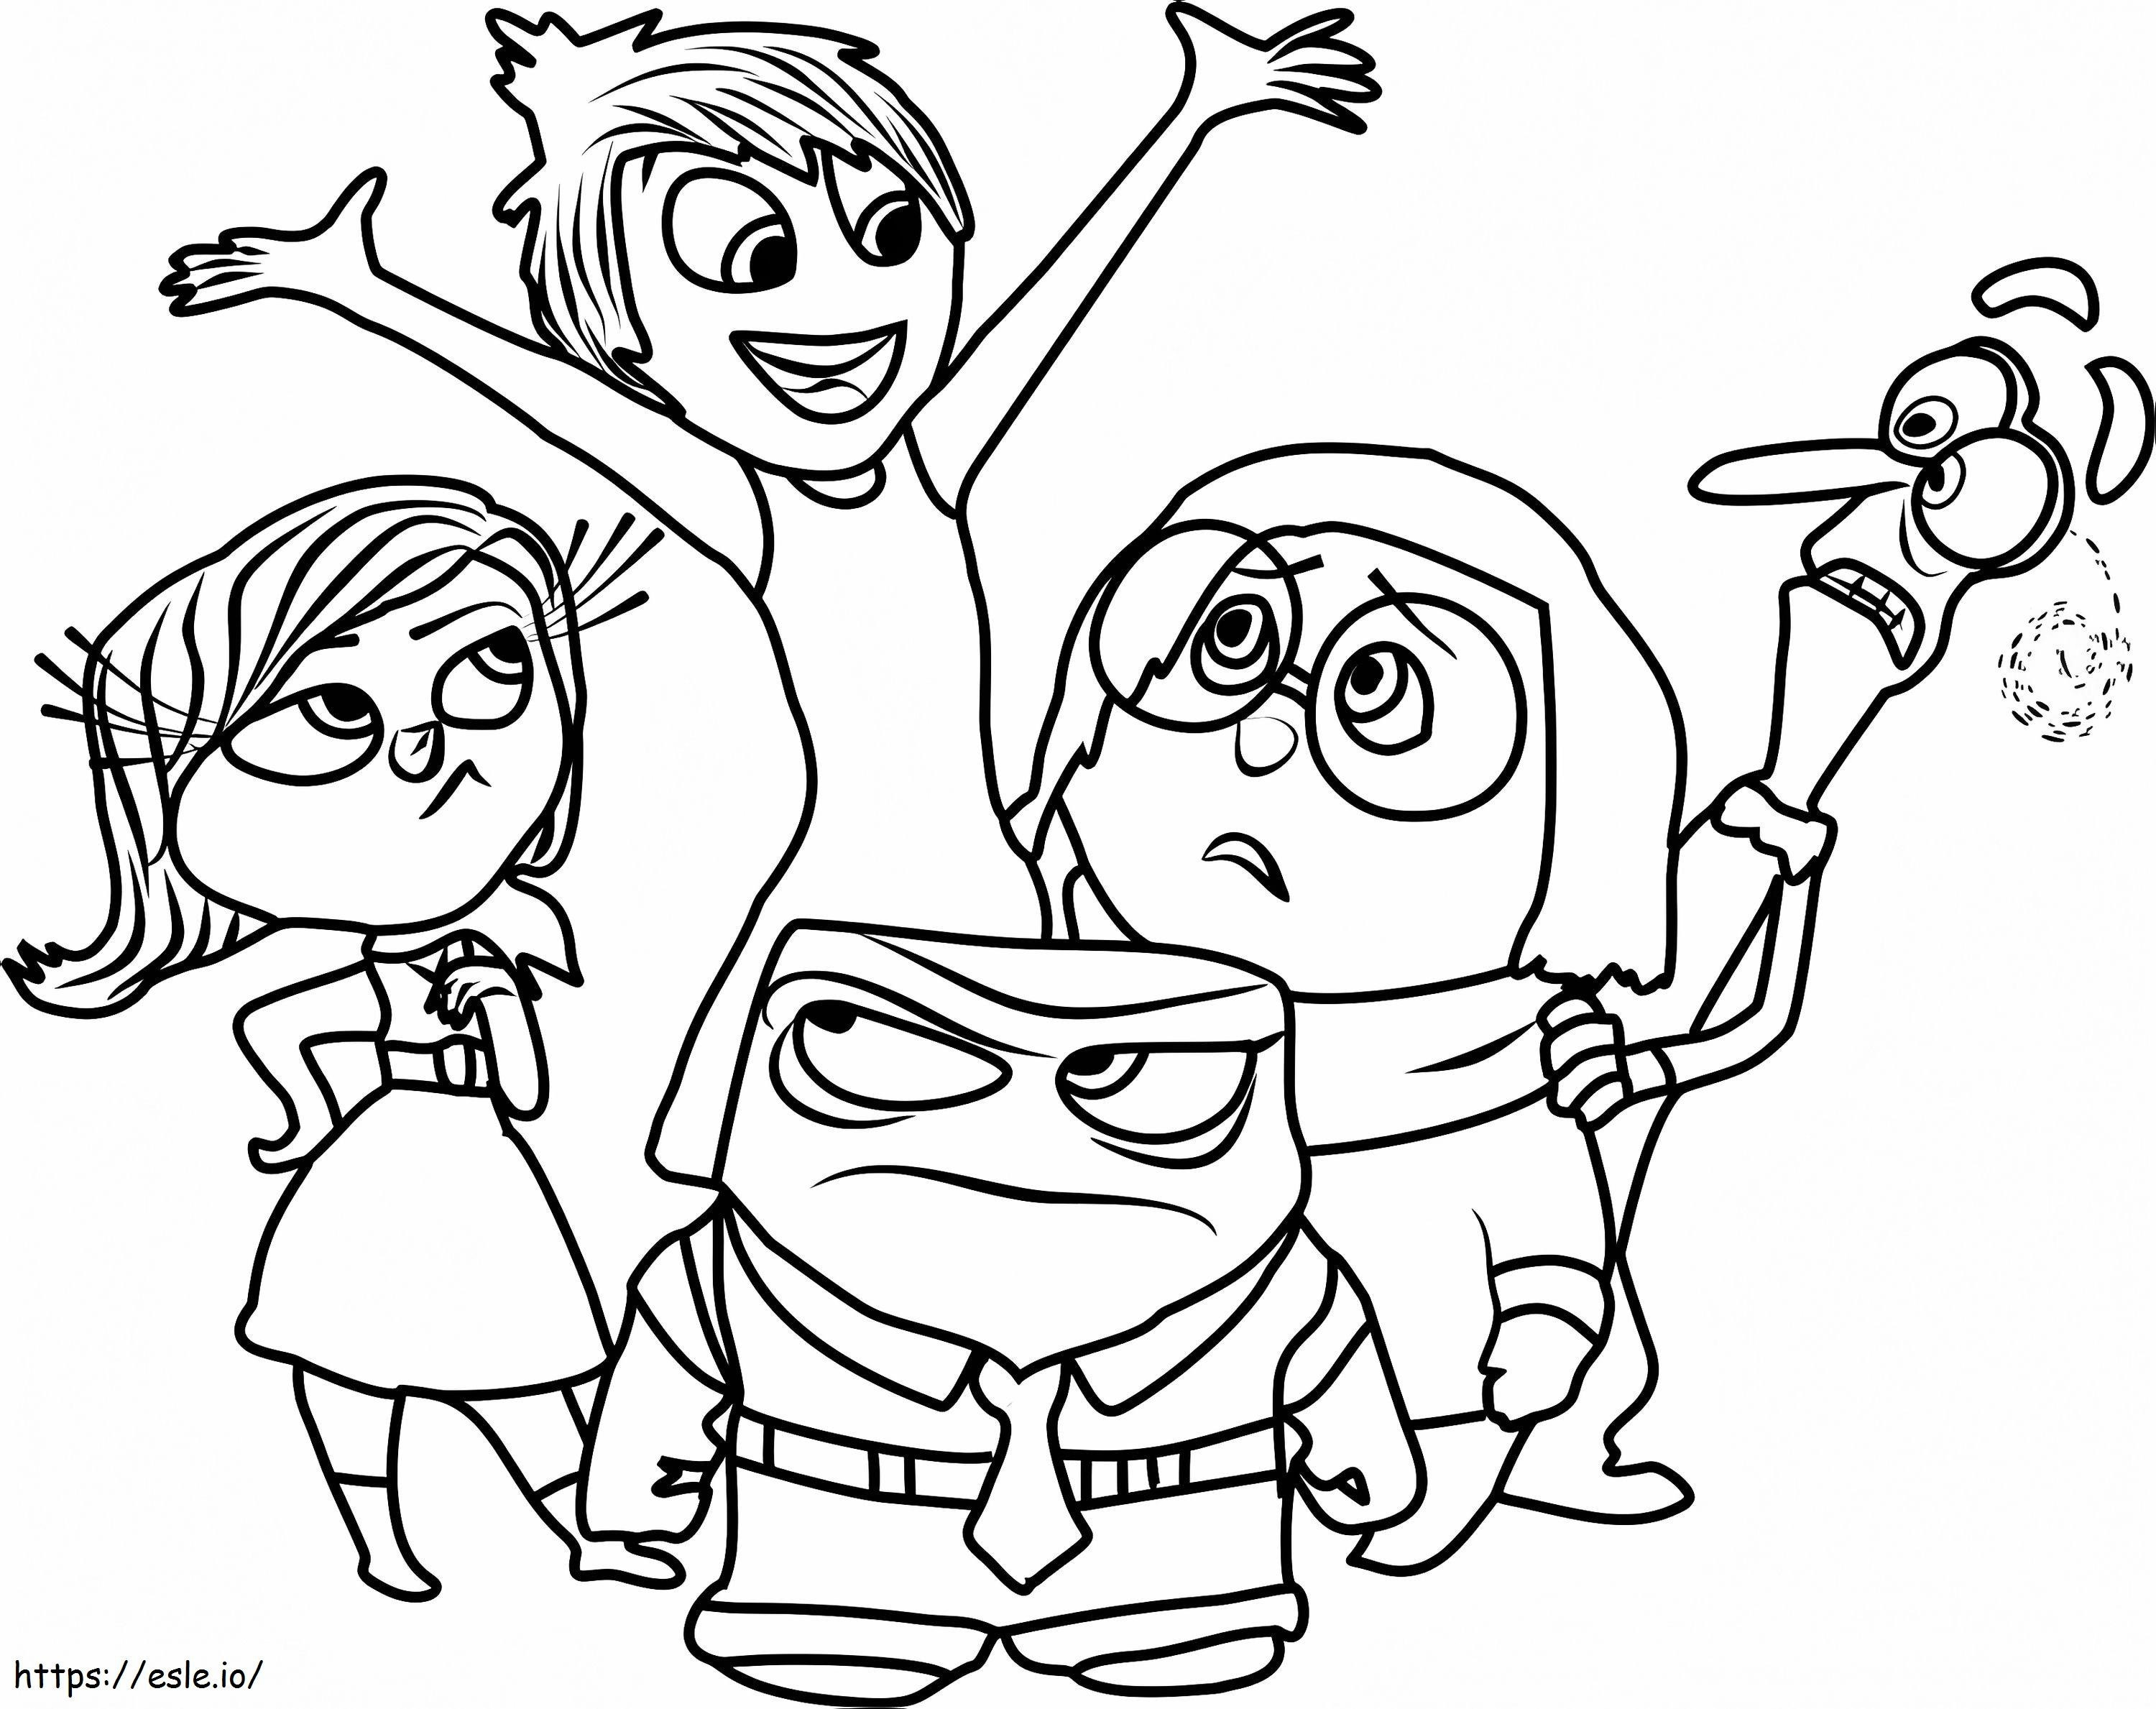 Equipe Inside Out para colorir